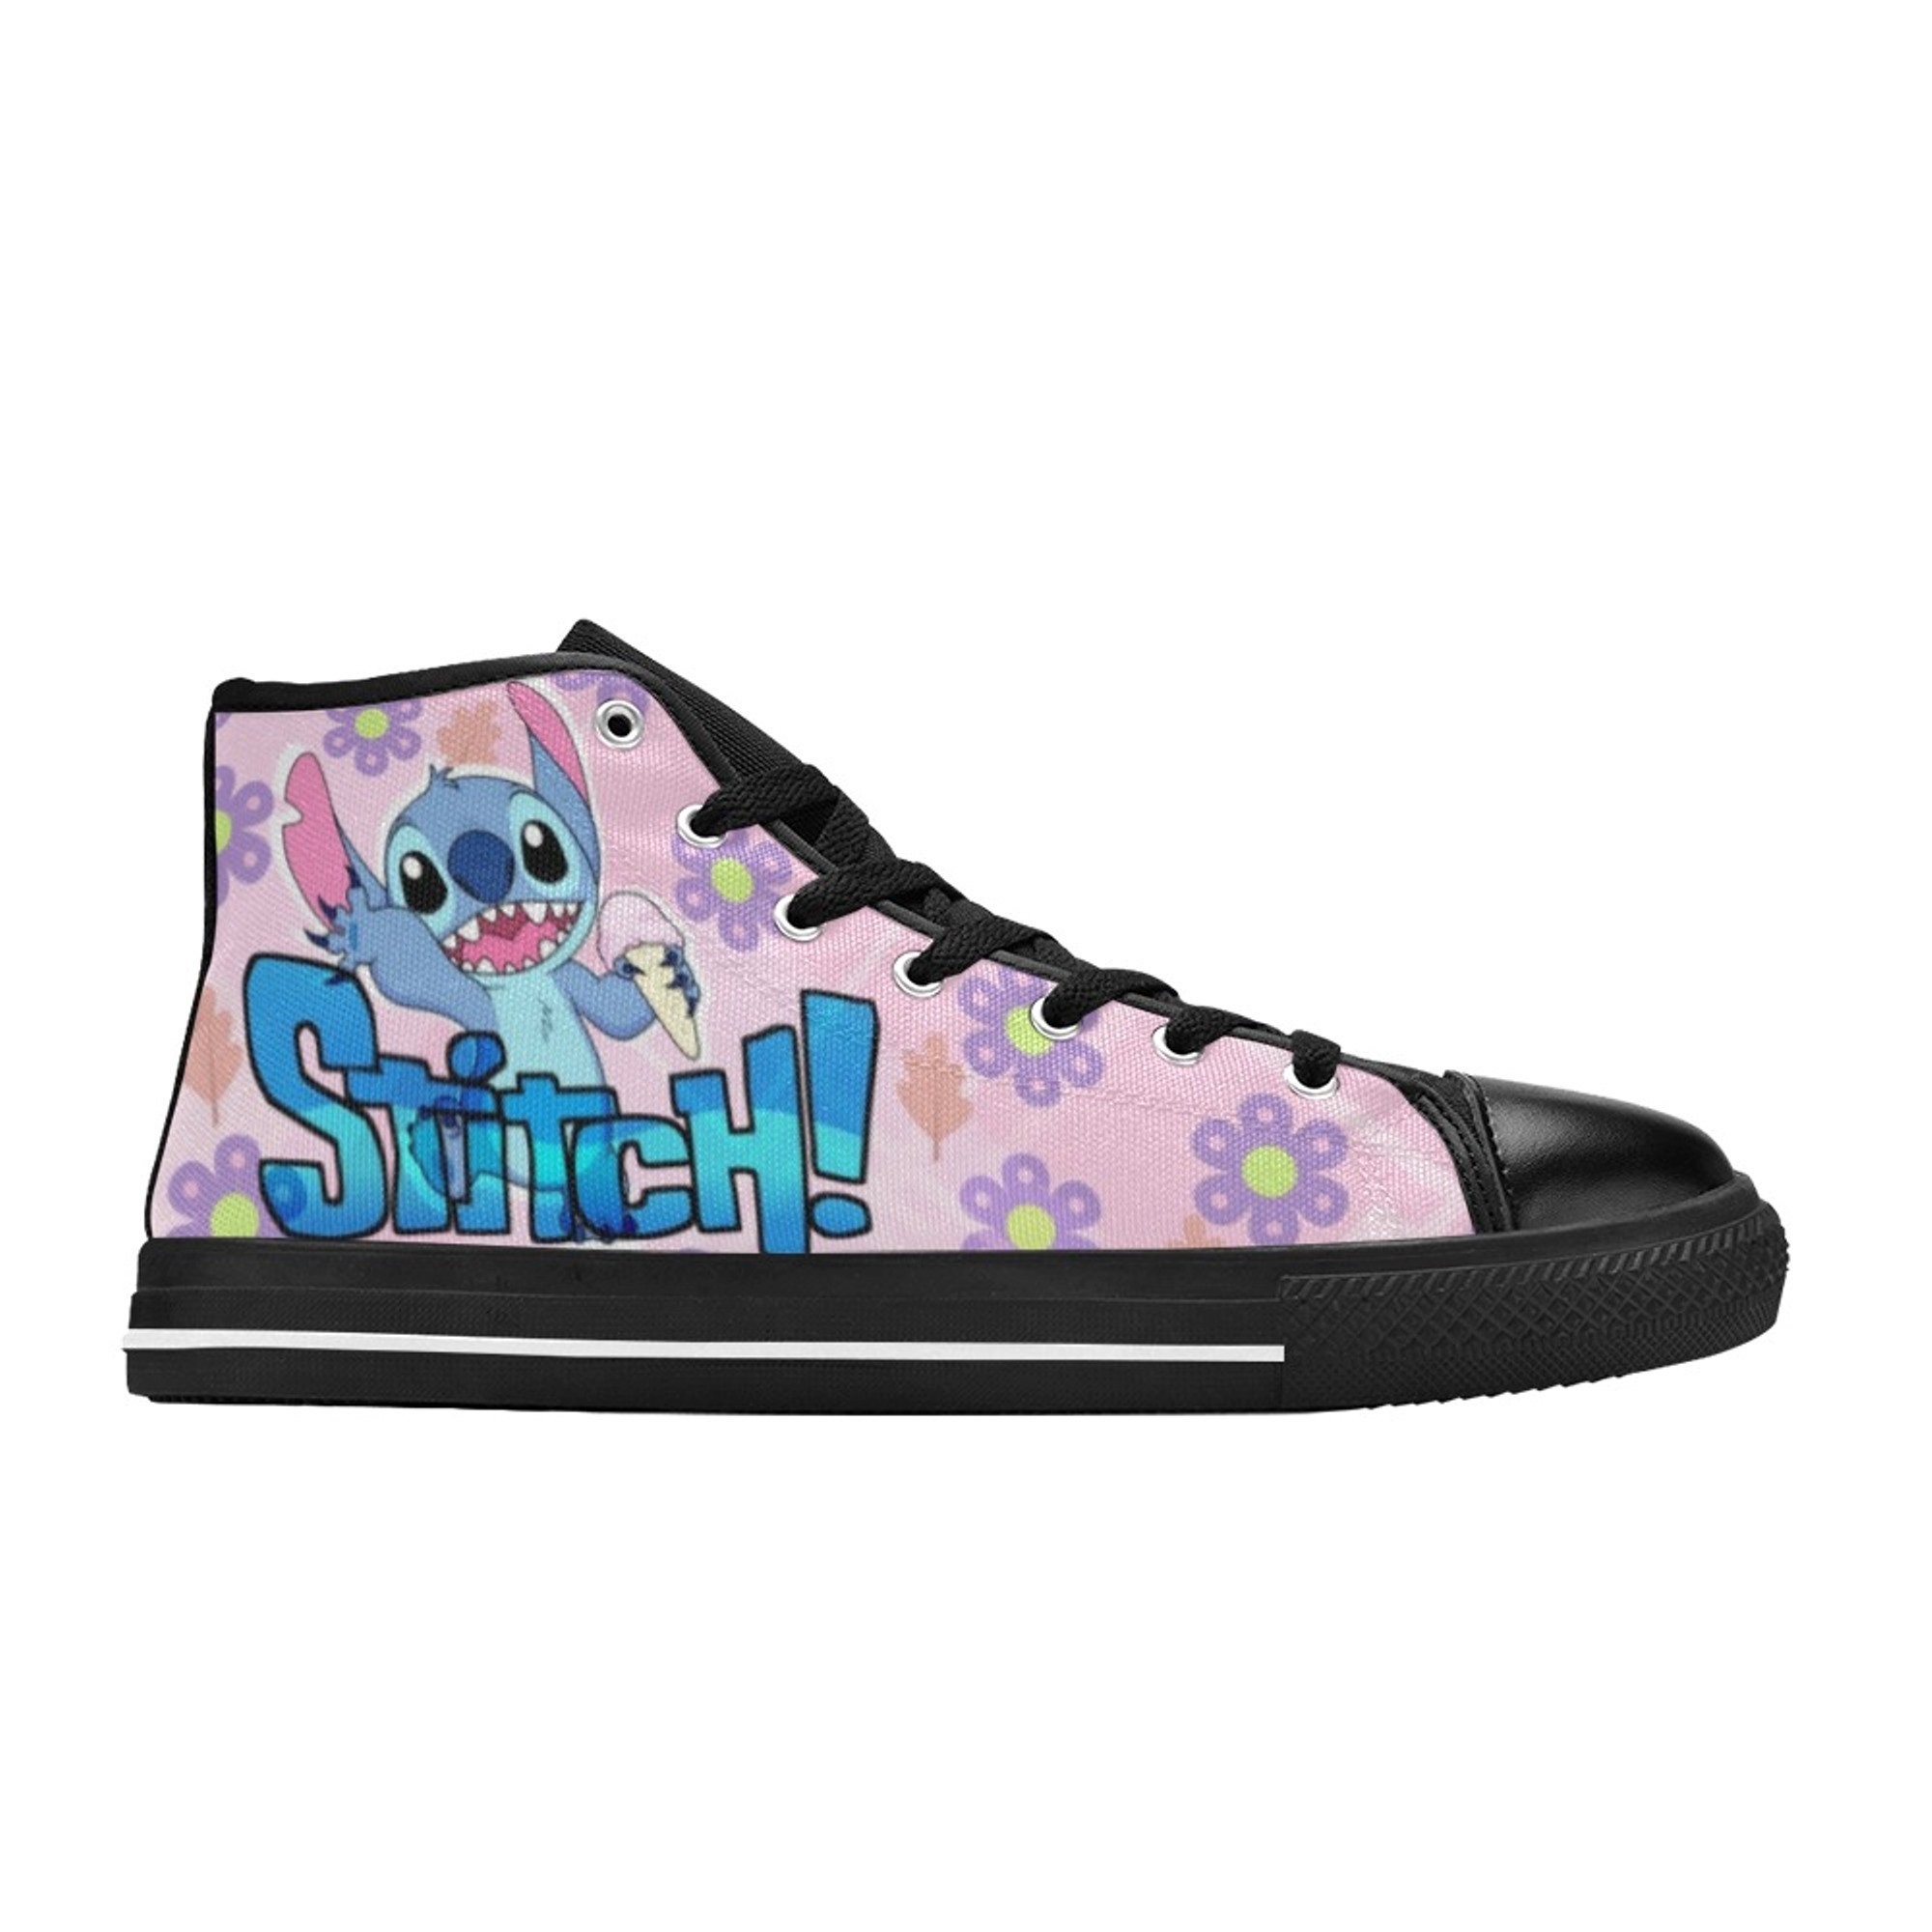 Discover Stitch Custom High Top Sneakers for Fans, Adults, Kids, Men and Women